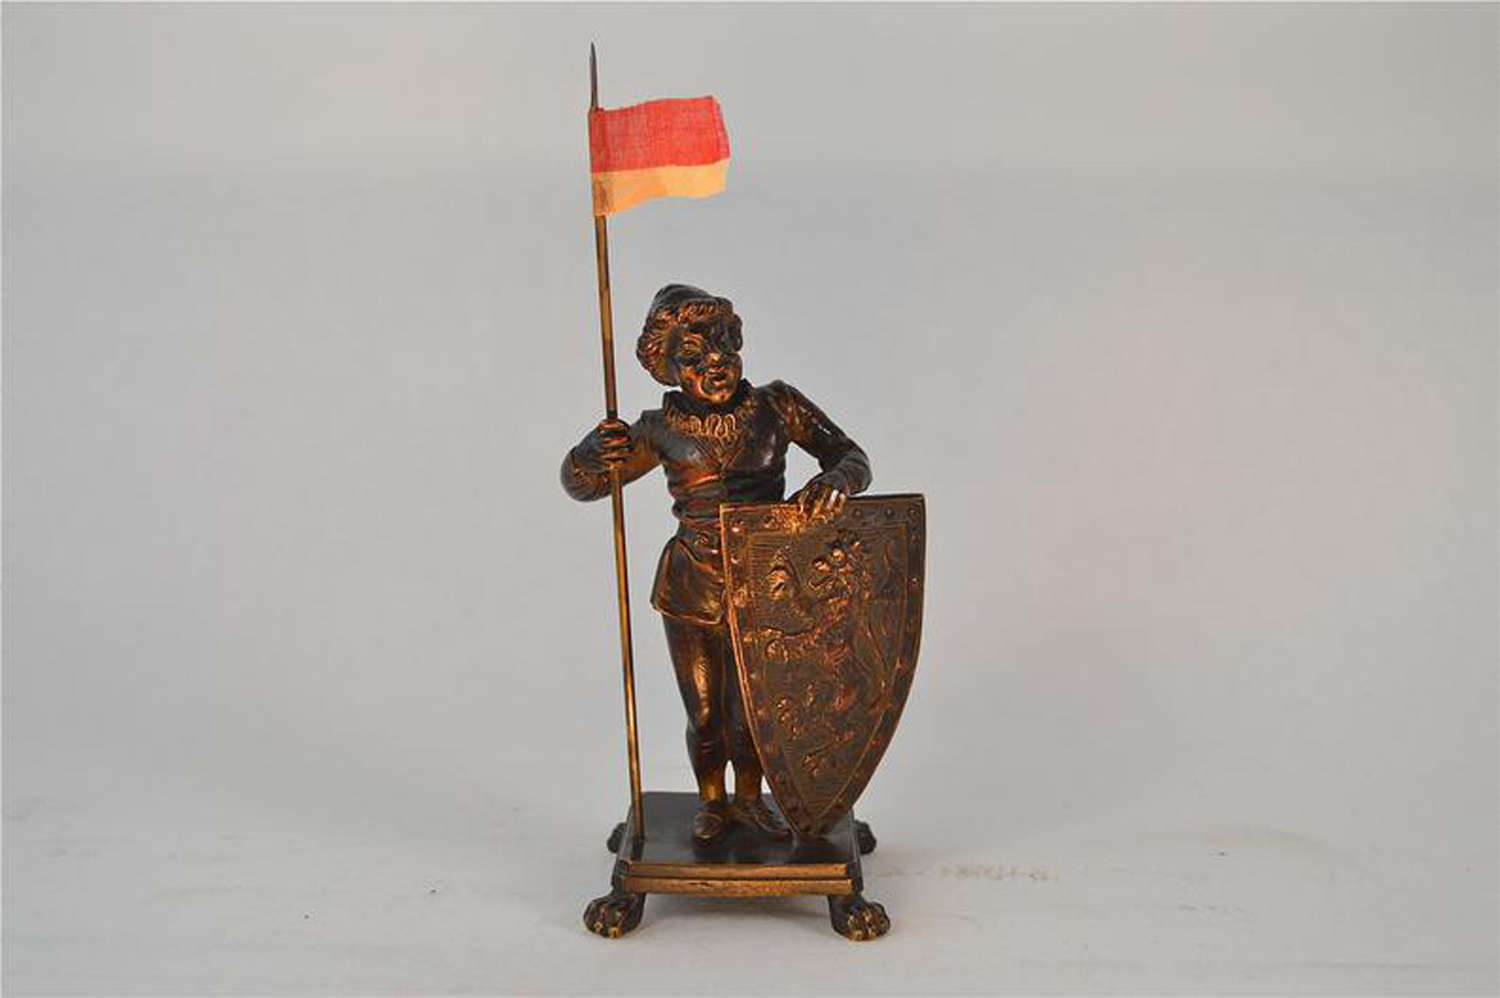 Antique bronze figure of a medieval man holding a flag